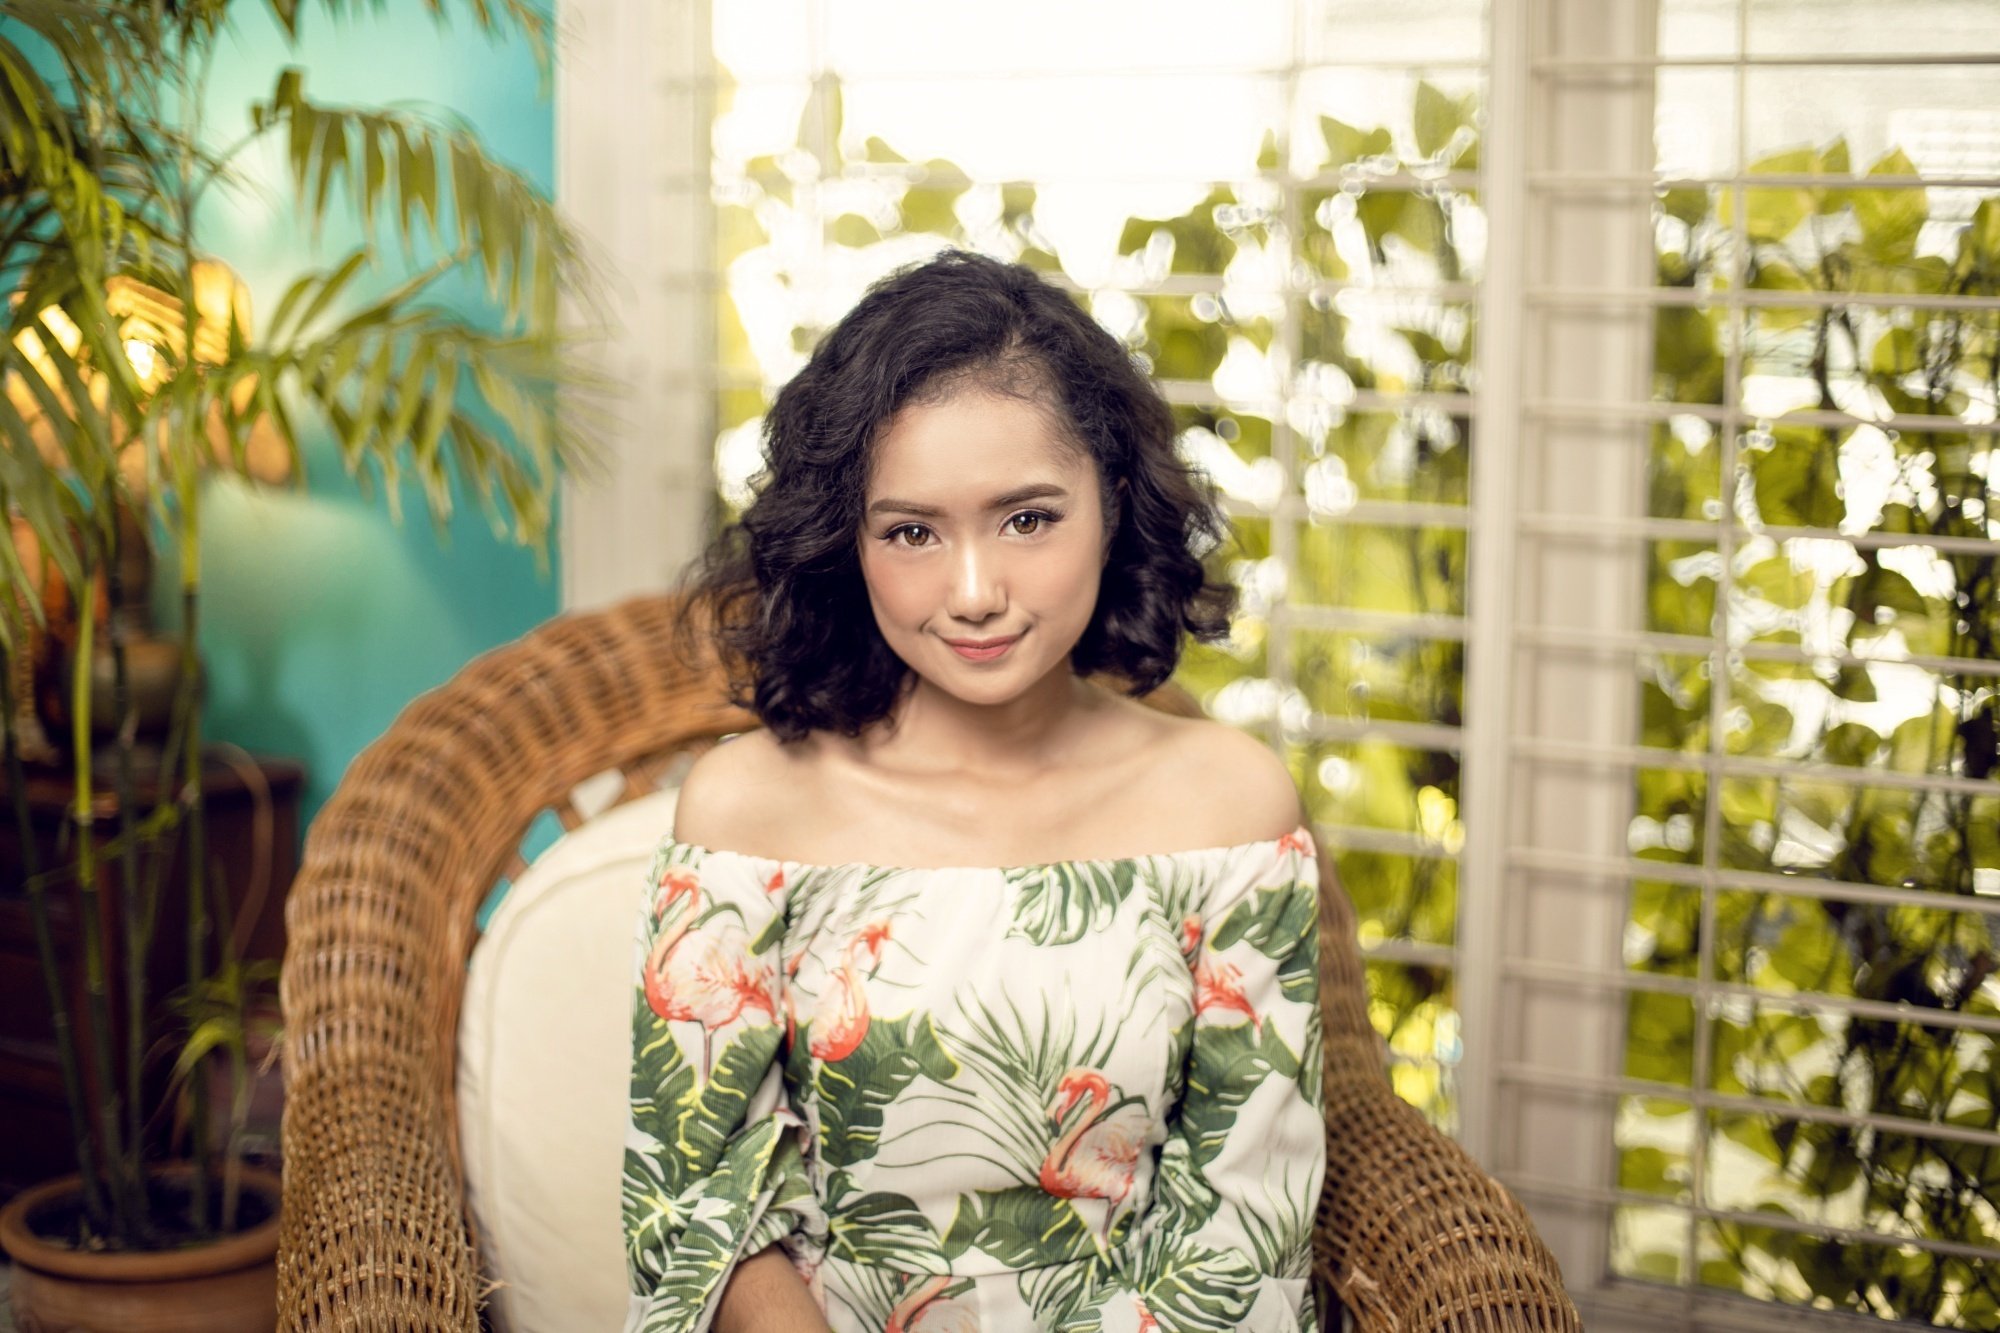 Asian woman with short curly hair sitting on a chair